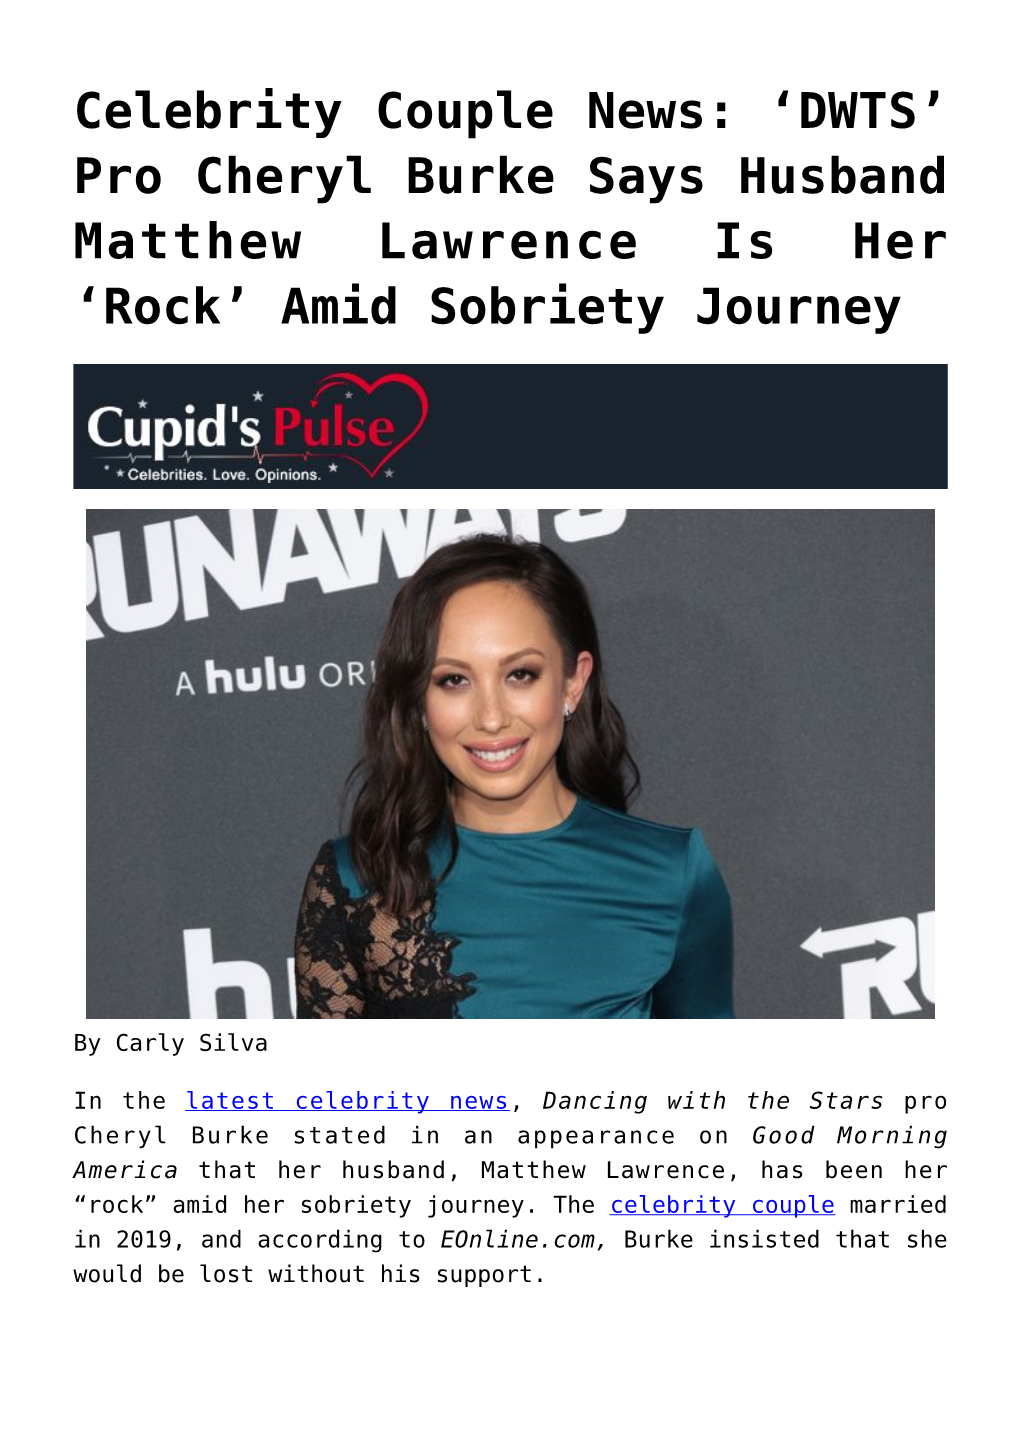 Pro Cheryl Burke Says Husband Matthew Lawrence Is Her ‘Rock’ Amid Sobriety Journey